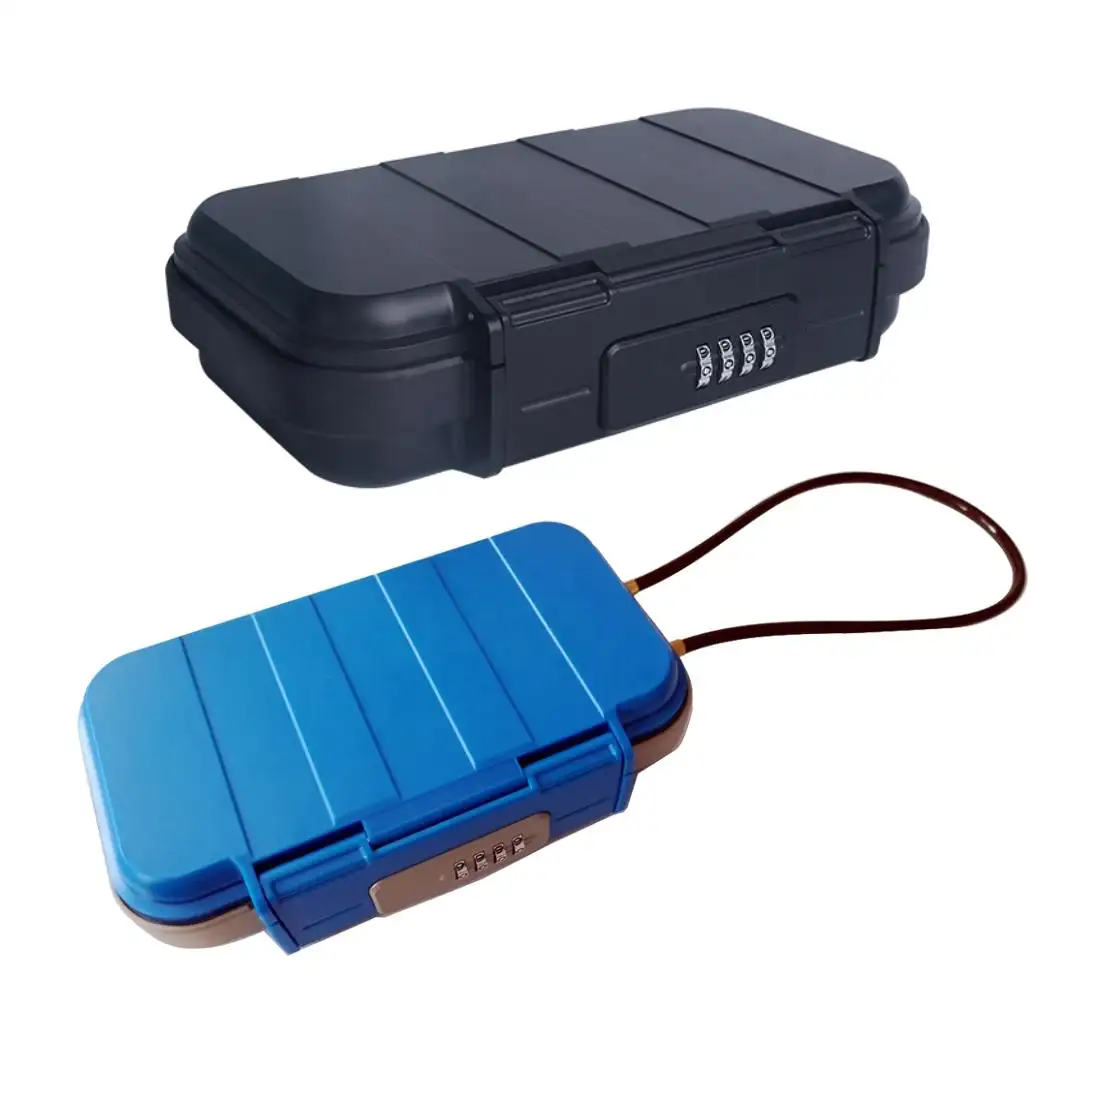 New Outdoor Waterproof Anti-Theft Combination Portable Beach Safe Box Safety Beach Chair Lock Box